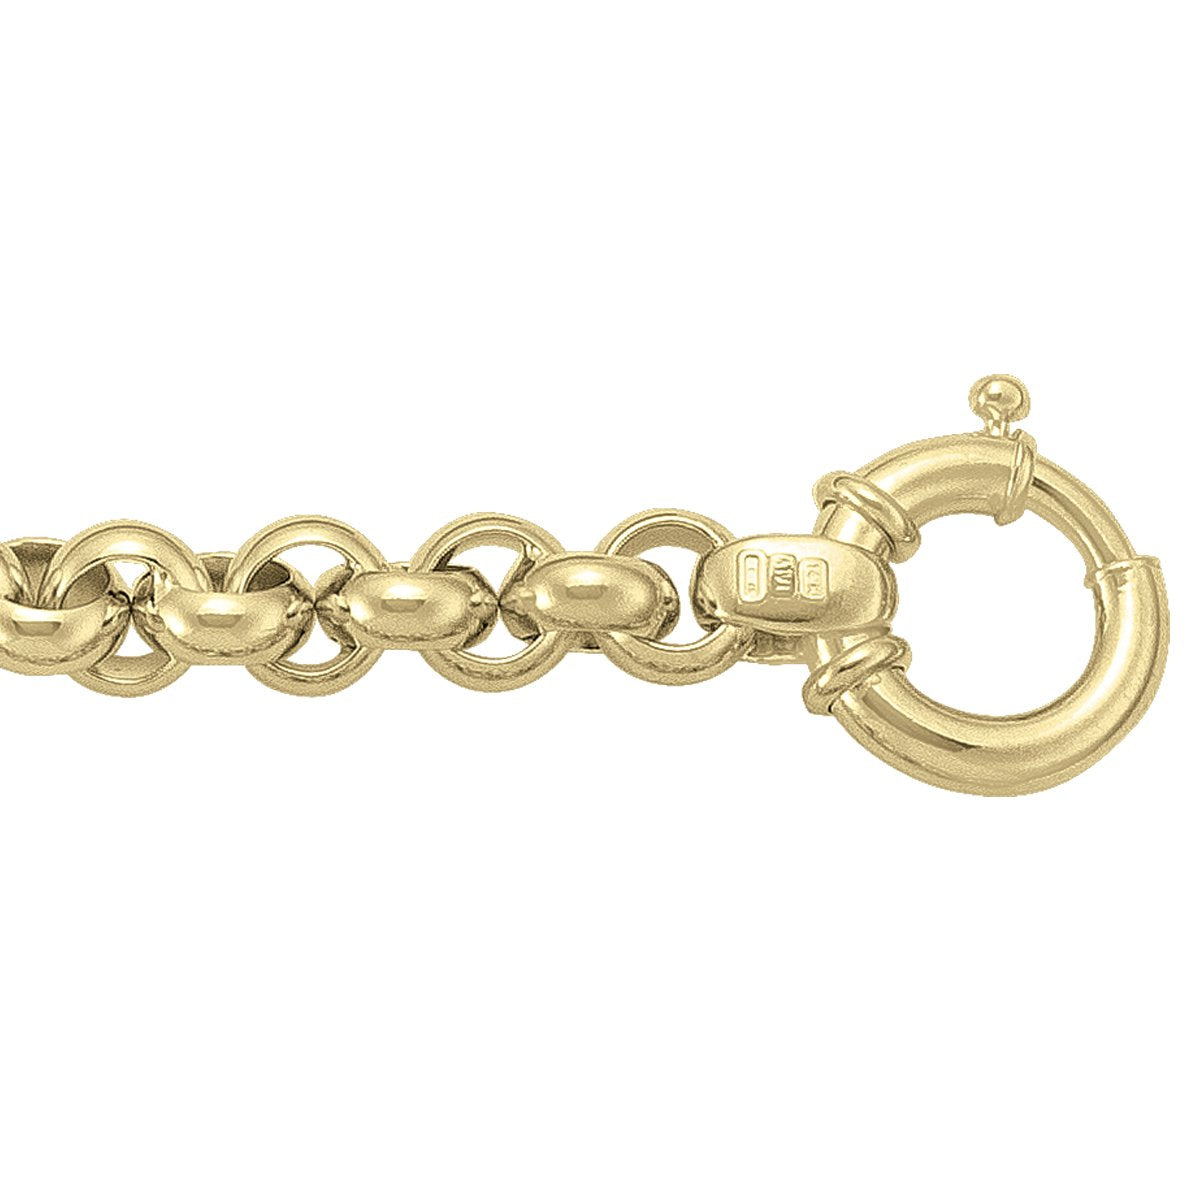 BRACELETS TWO TONE GOLD HOLLOW ROUND FANCY LINK CHAIN